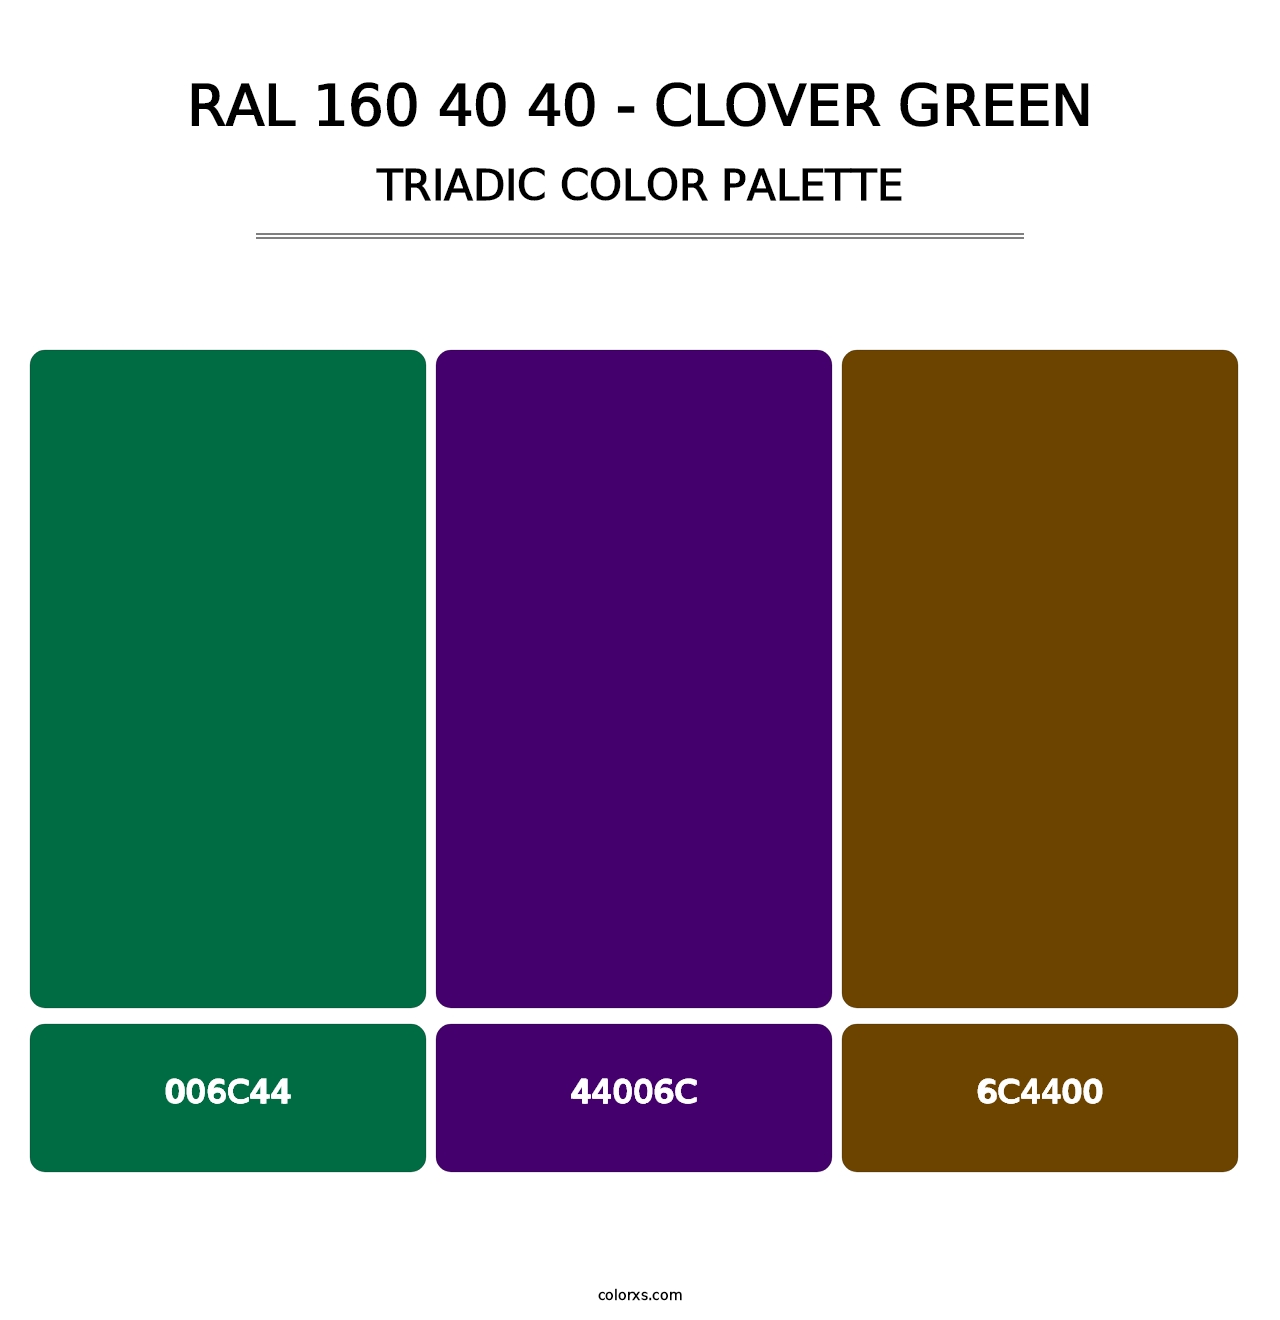 RAL 160 40 40 - Clover Green - Triadic Color Palette